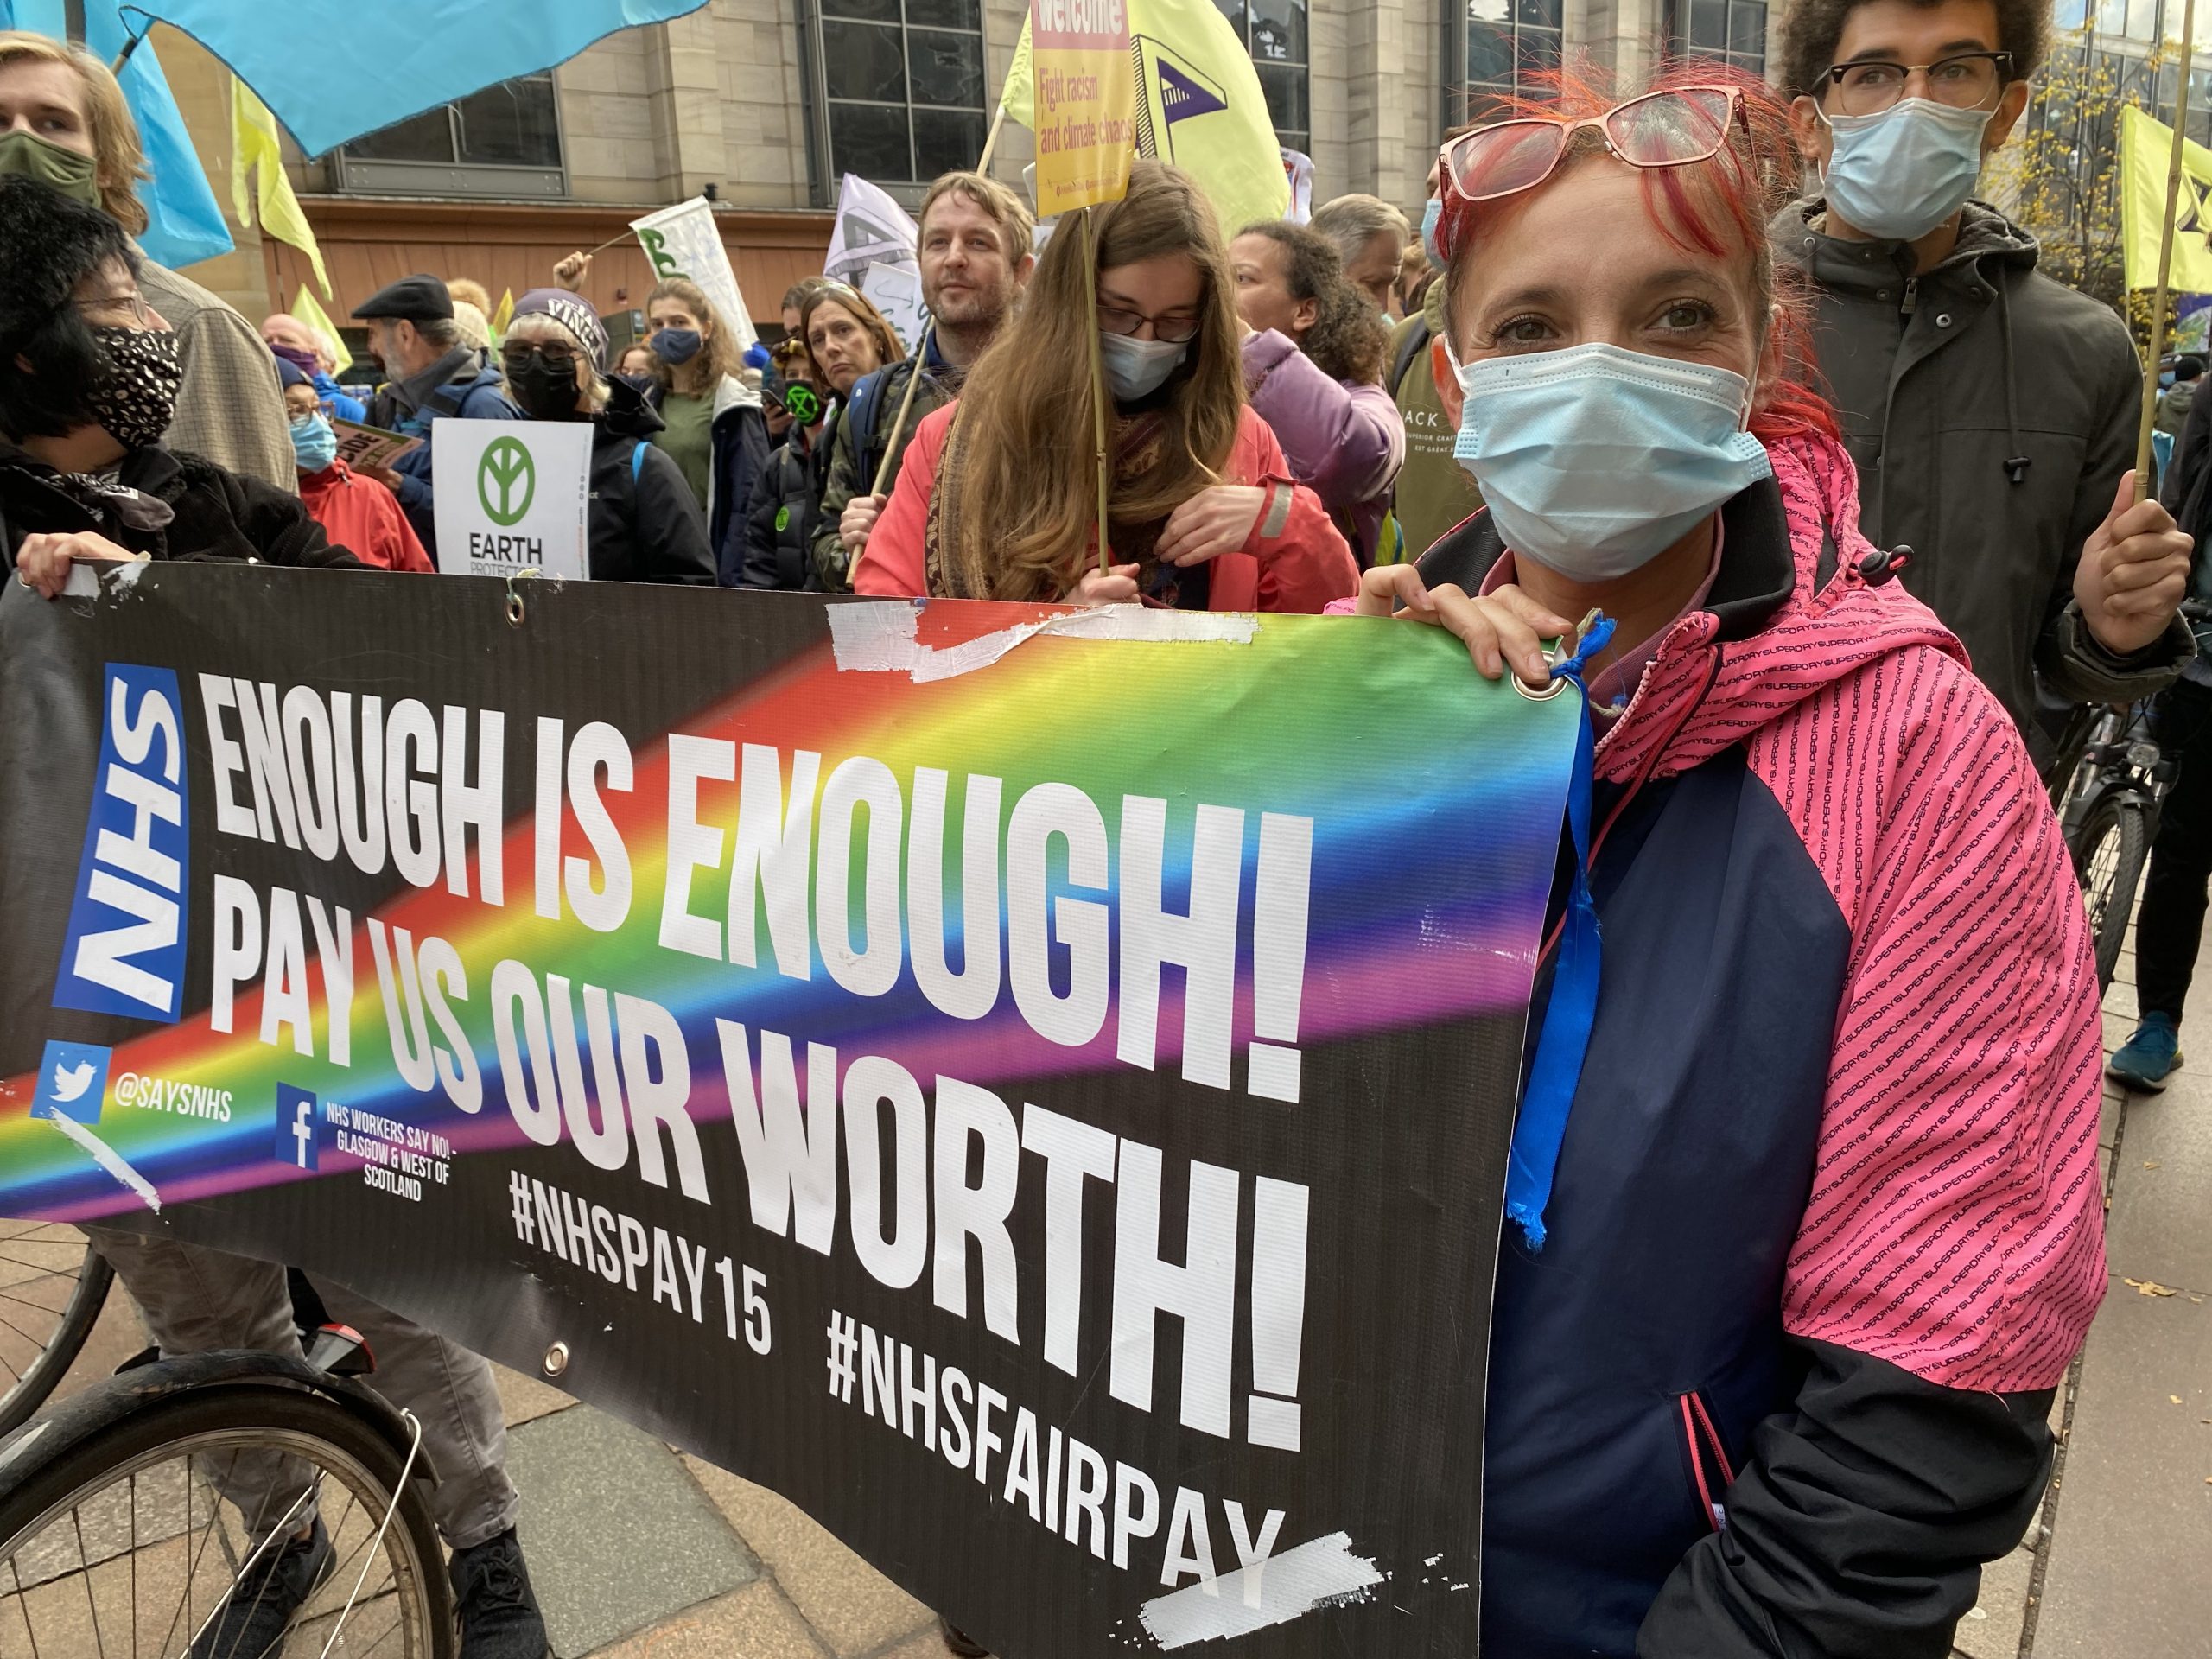 Brenda marches through the streets of Glasgow at the Extinction Rebellion demo, wearing a blue and pink jacket, glasses and facemask. She is carrying a banner which reads: 'NHS. Enough is enough! Pay us our worth!"